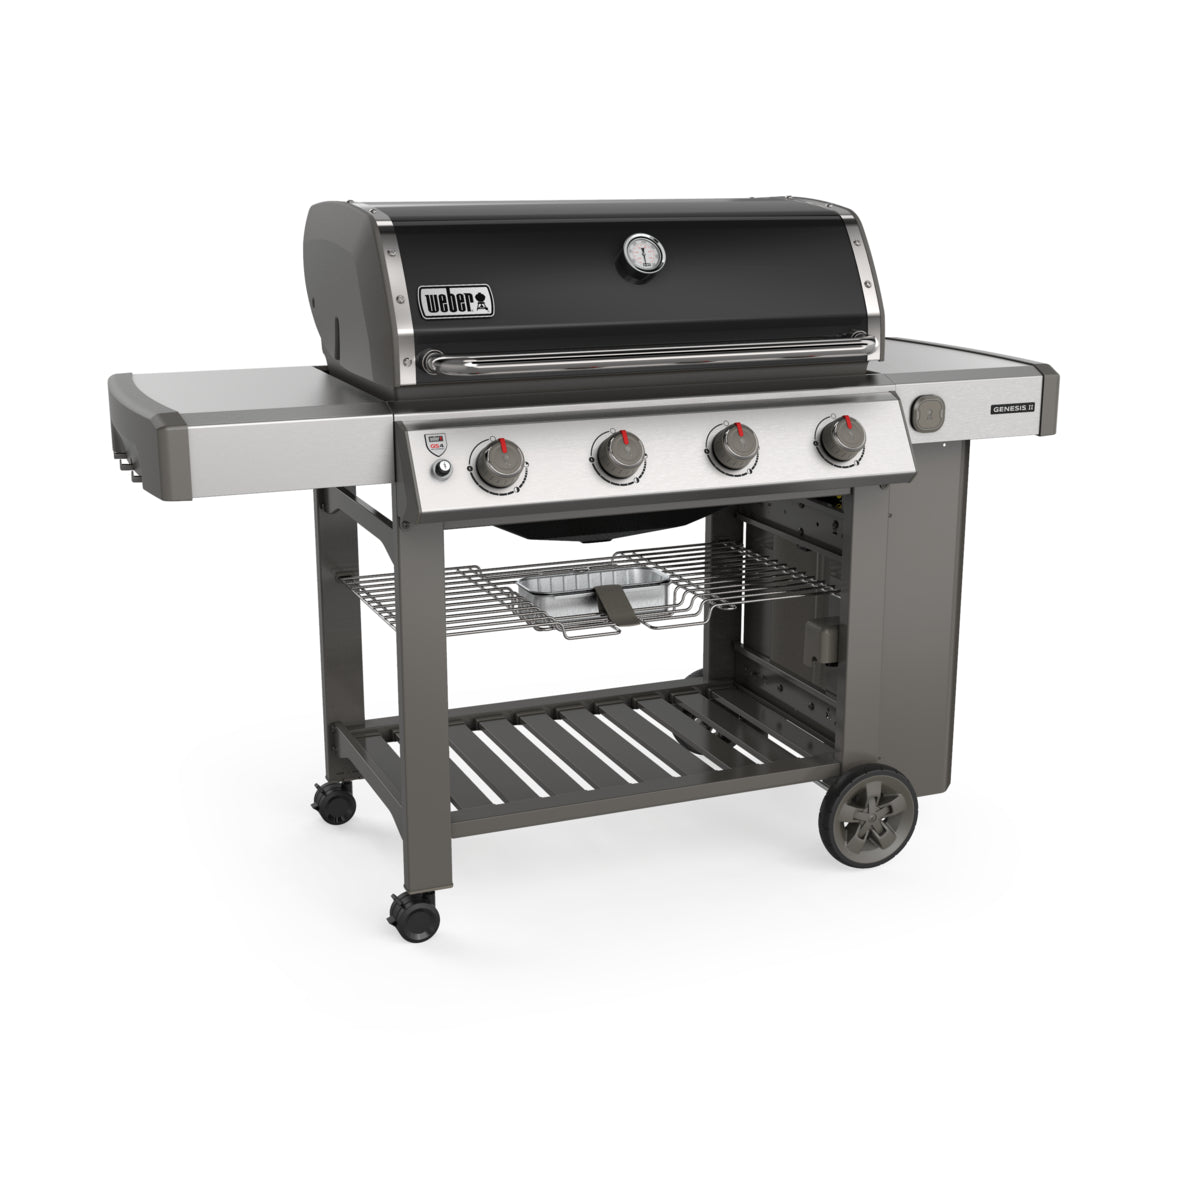 Genesis® II E-410 GBS Gas Barbecue SPECIAL OFFER €1299